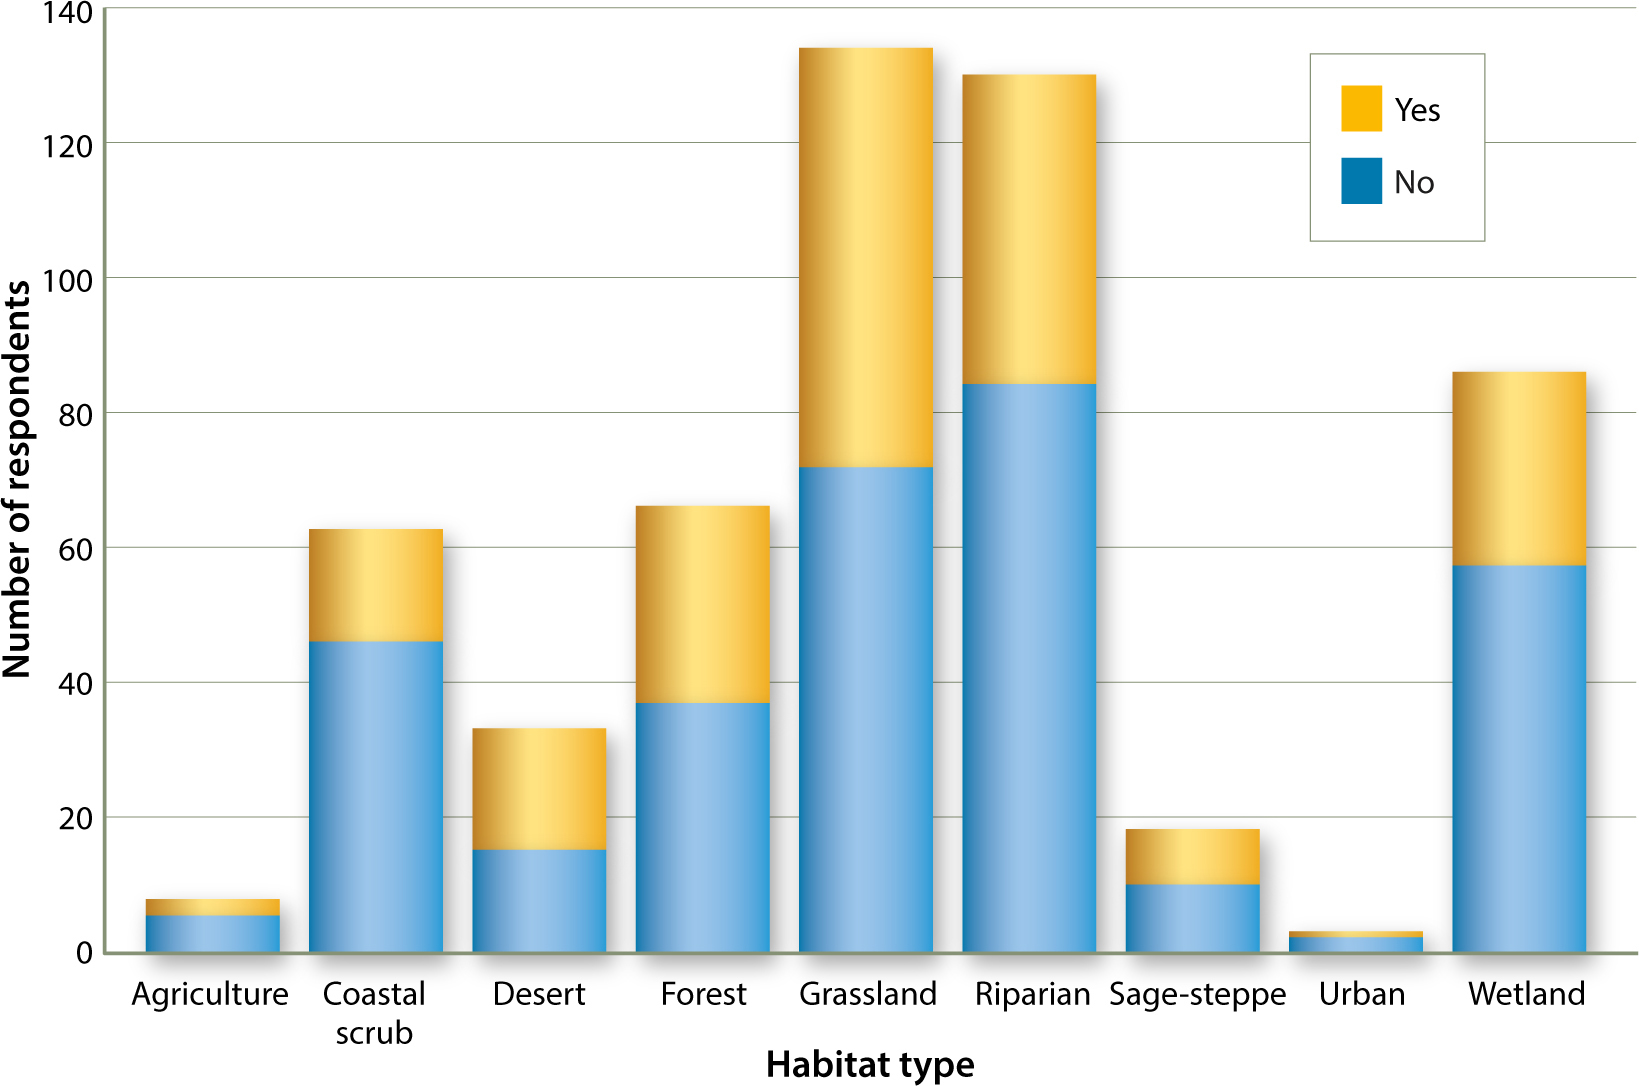 Number of respondents, by habitat type, who used/did not use nonnative species for revegetation projects.